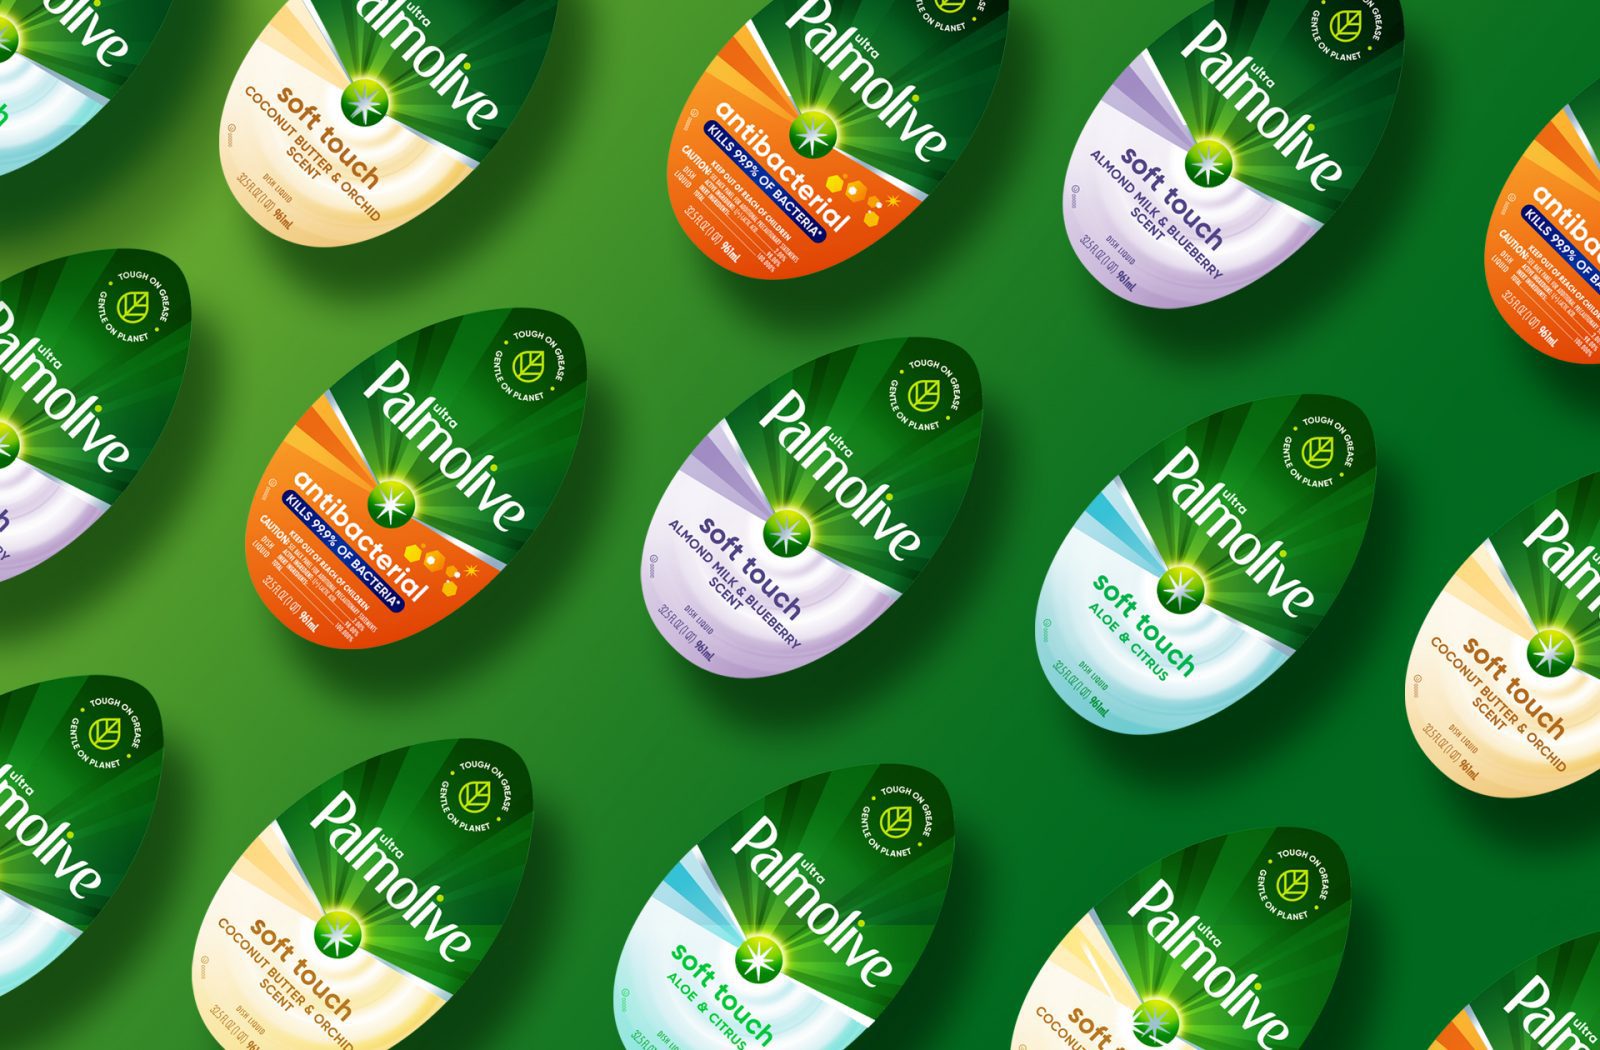 Render of various different labels, showcasing variant segmentation in sales samples for palmolive dish soap.